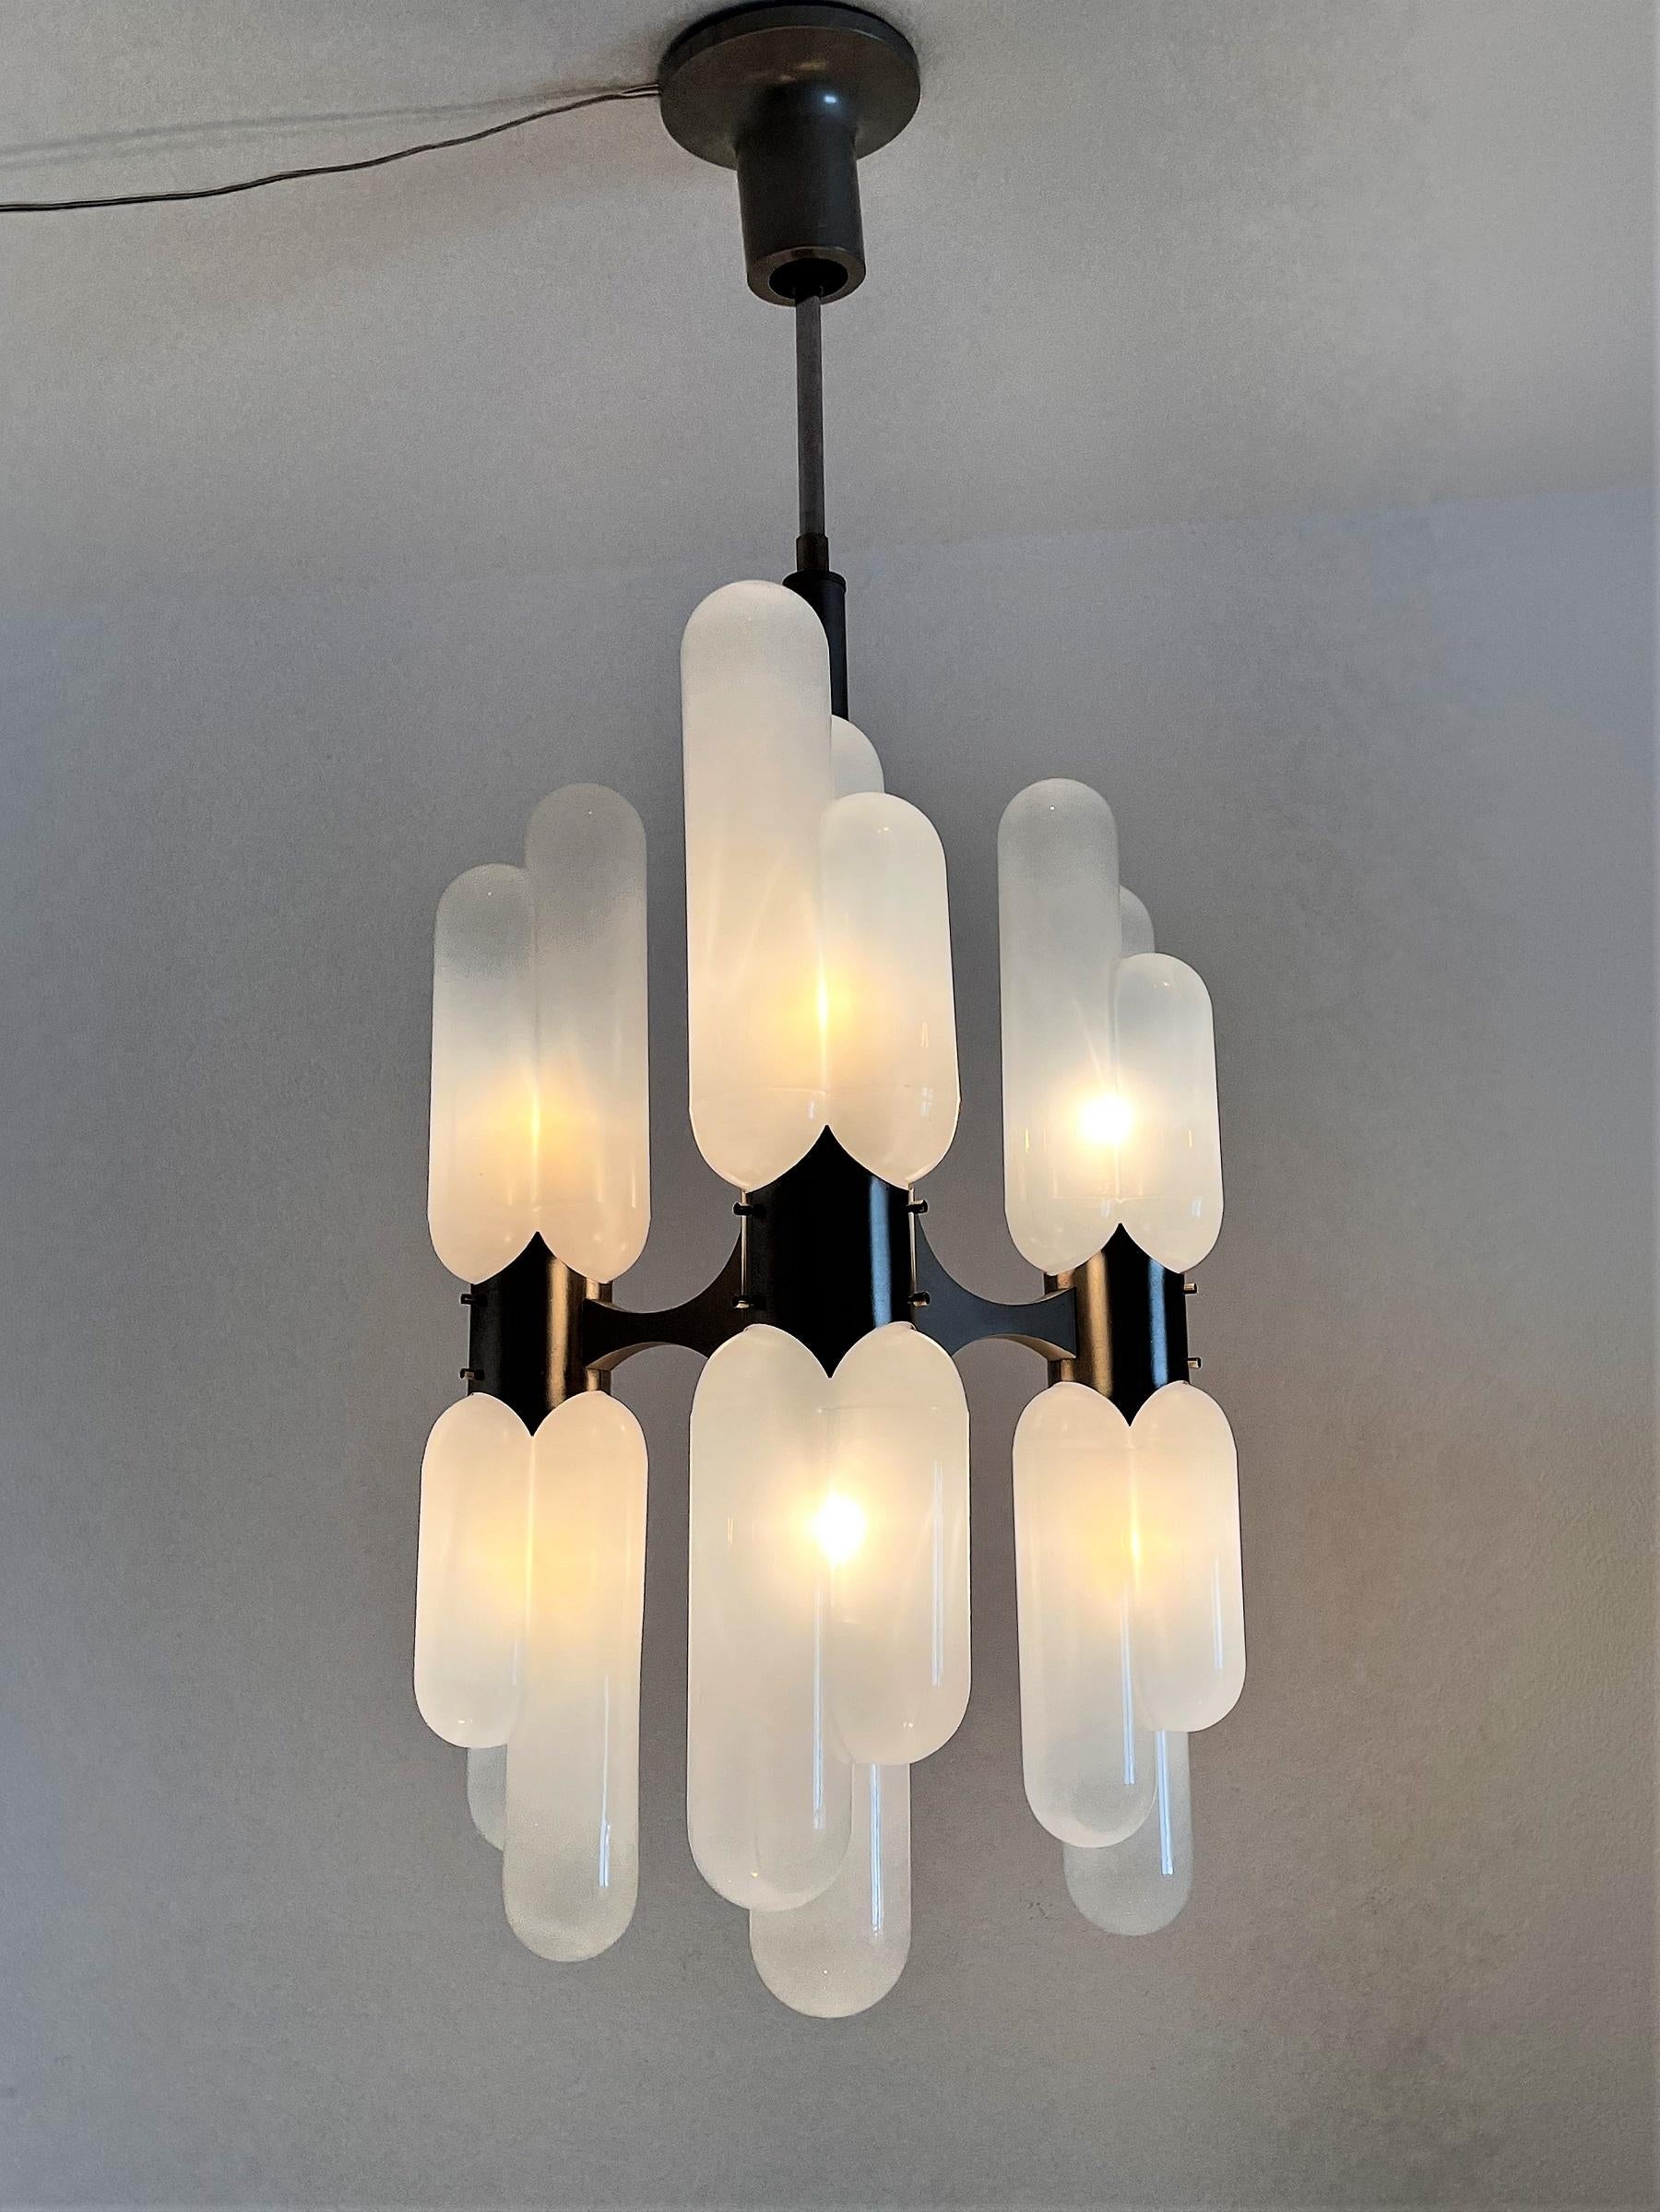 Beautiful chandelier from the Italian mid-century.
Designed by Carlo Nason in the 60s, and manufactured from Mazzega in the 70s. 
This chandelier called 